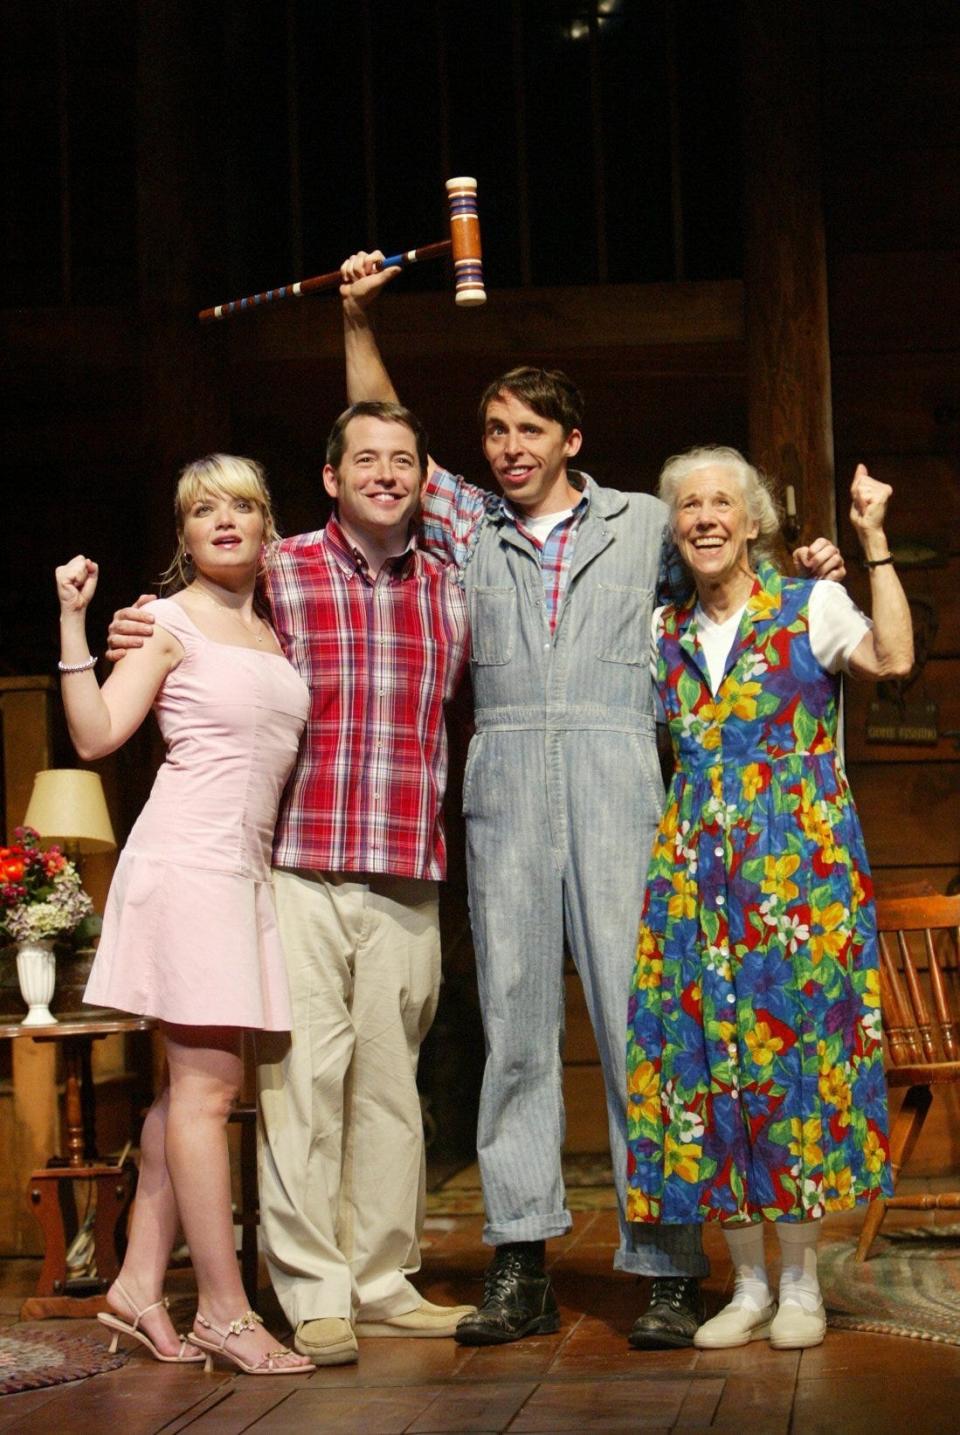 Mary Catherine Garrison, Matthew Broderick, Kevin Cahoon and Frances Sternhagen in a scene from the Roundabout Theatre Company's production of The Foreigner,'' in 2004. Sternhagen, a Tony-winning actor who was familiar to fans of TV's "Cheers," "Sex and the City" and "ER," died Nov. 27 at age 93.